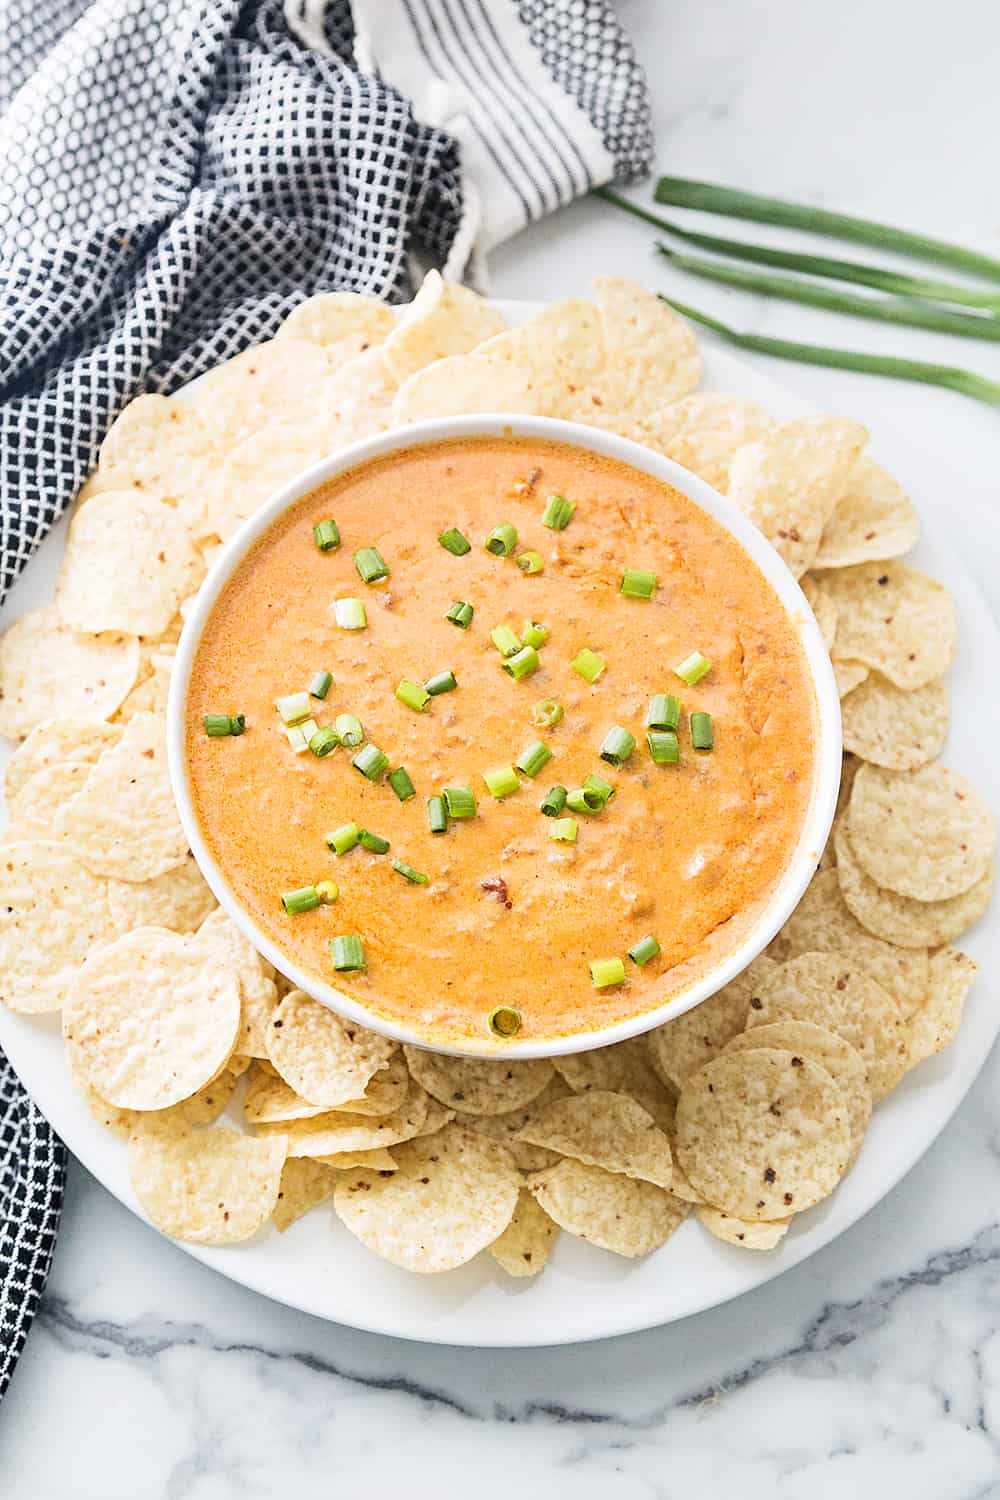 Ready for an extra cheesy, slightly spicy appetizer family and friends will devour in record time? Whip up some easy chorizo cheese dip. Your guests--and your taste buds--will thank you. #halfscratched #chorizo #chorizodip #appetizer #cheese #easyrecipe #baking #cooking #holidayrecipe #gamedayrecipe